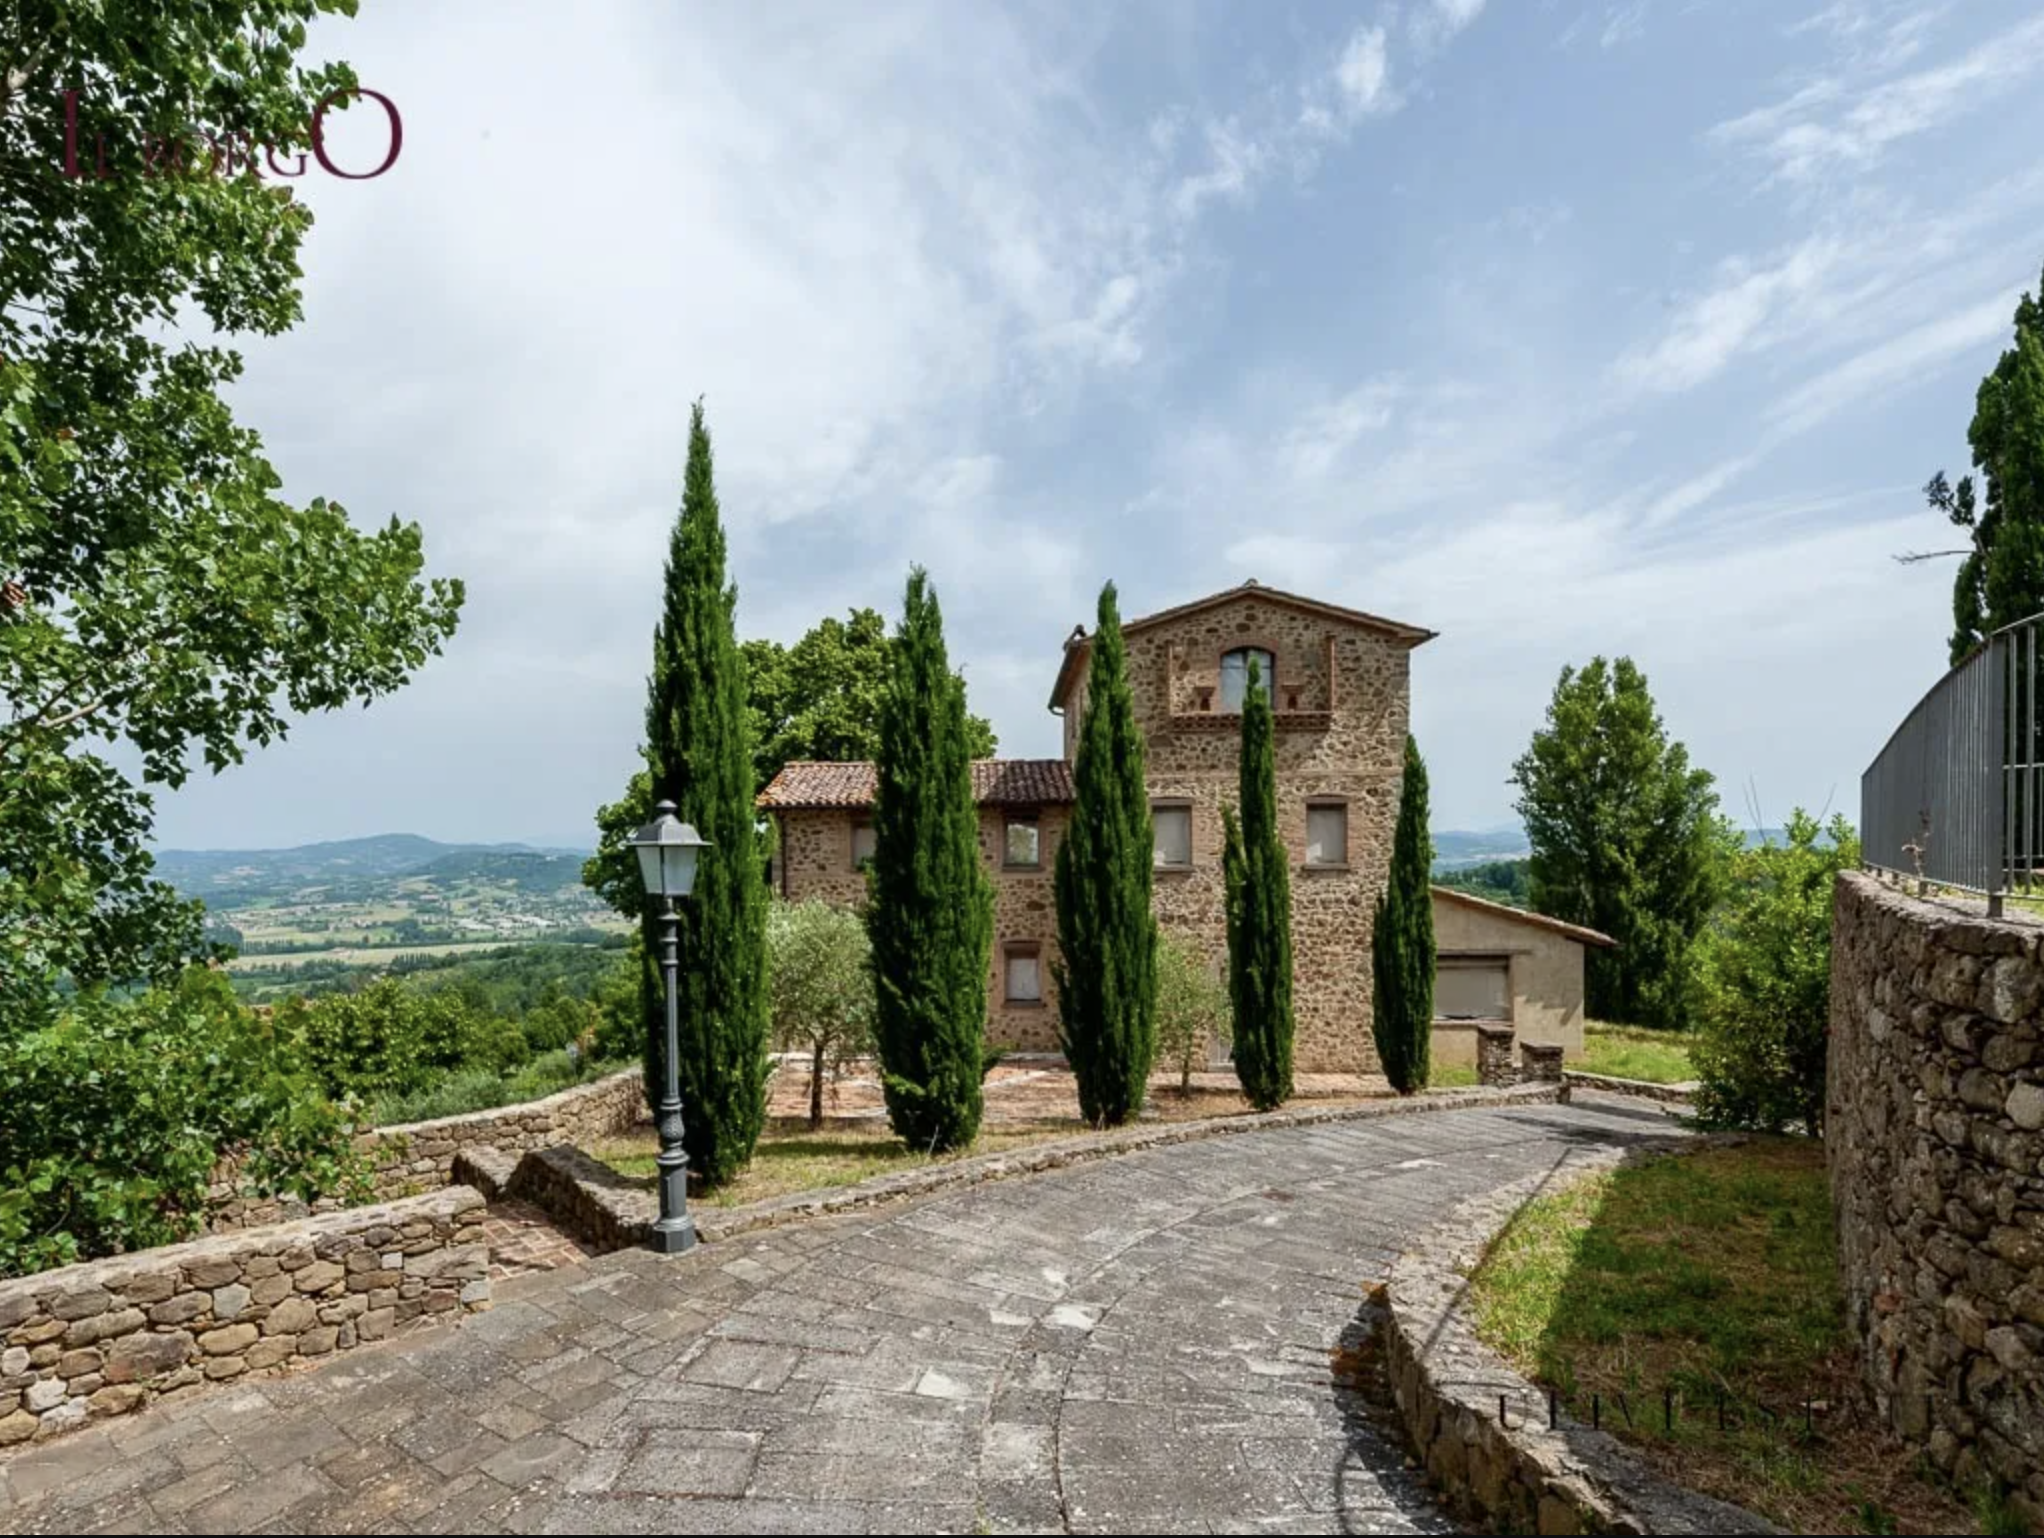 Francis York Borgo Pieve di Comunaglia in Umbria, Italy With 17 Country Houses, 1000-Year-Old Church, Vineyards 00015.png